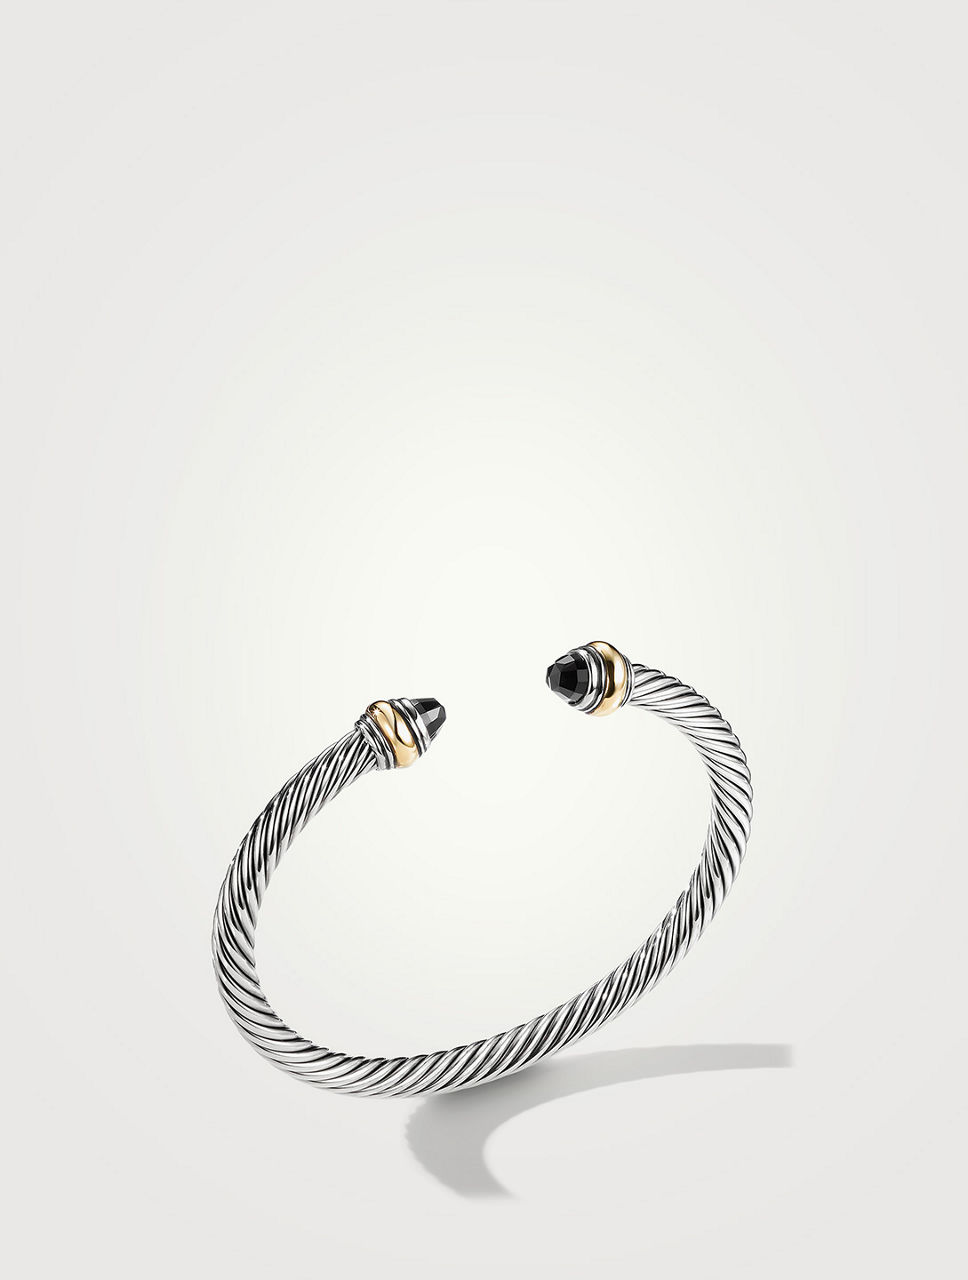 Cable Classics Bracelet Sterling Silver With Black Onyx And 14k Yellow Gold